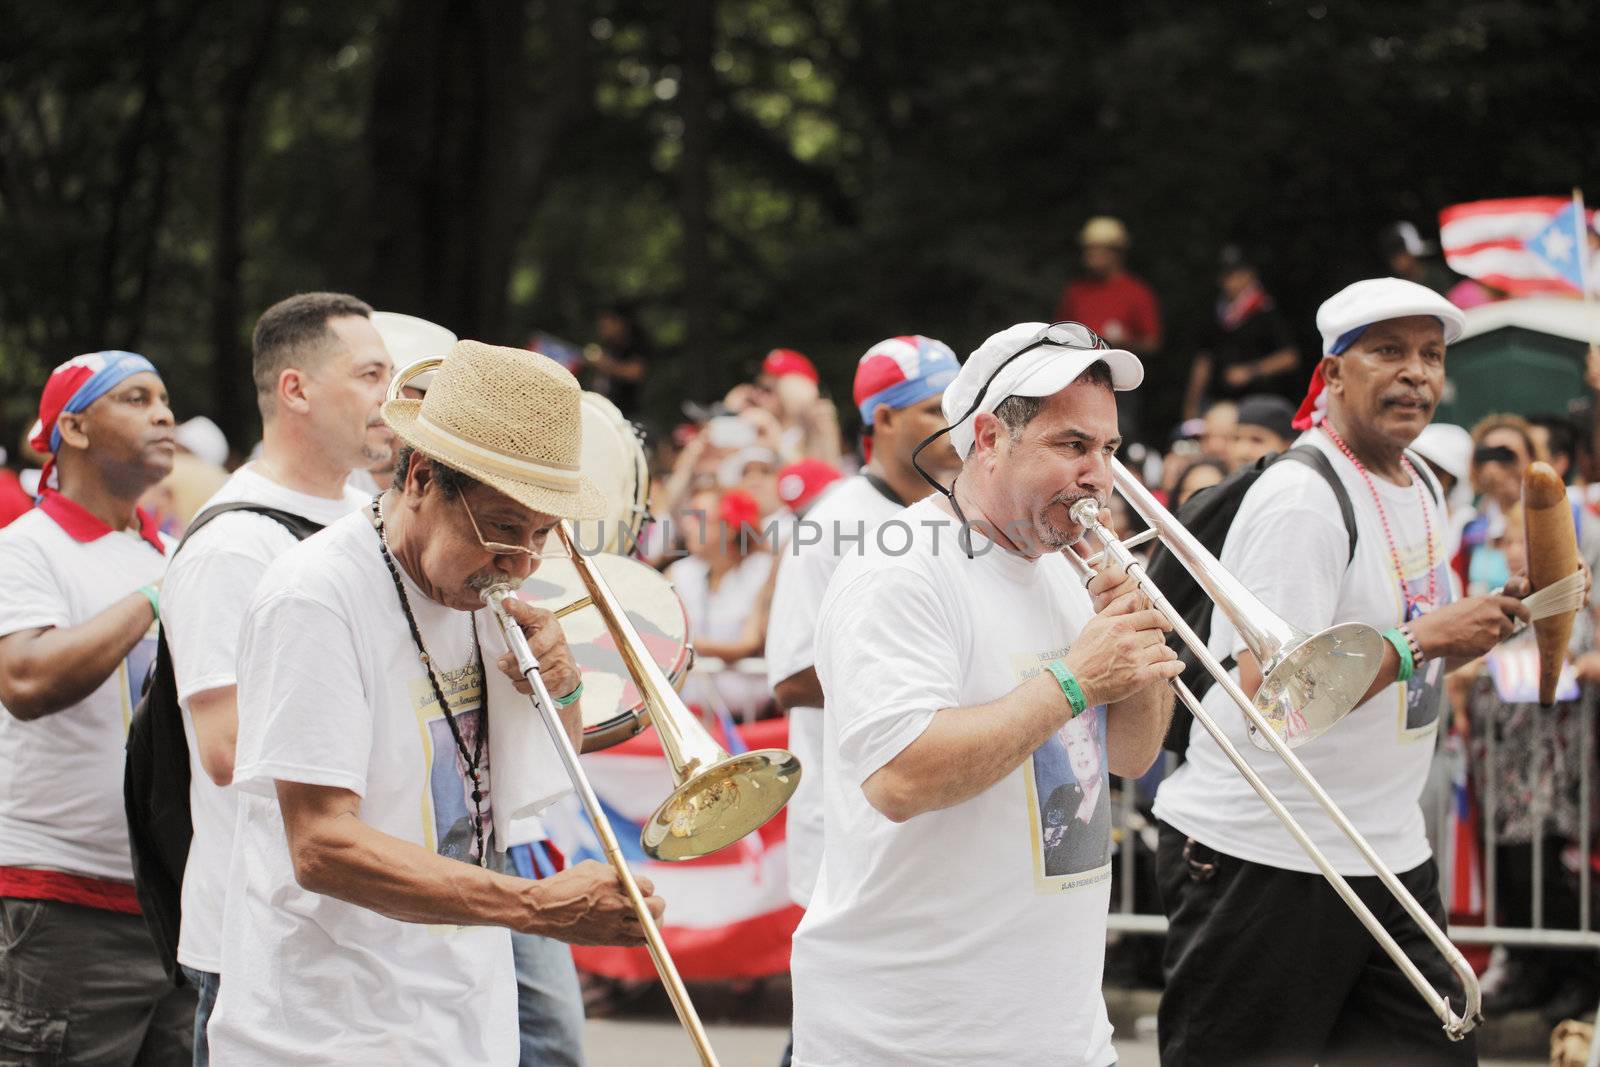 Puerto Rican Day Parade by Stocksnapper